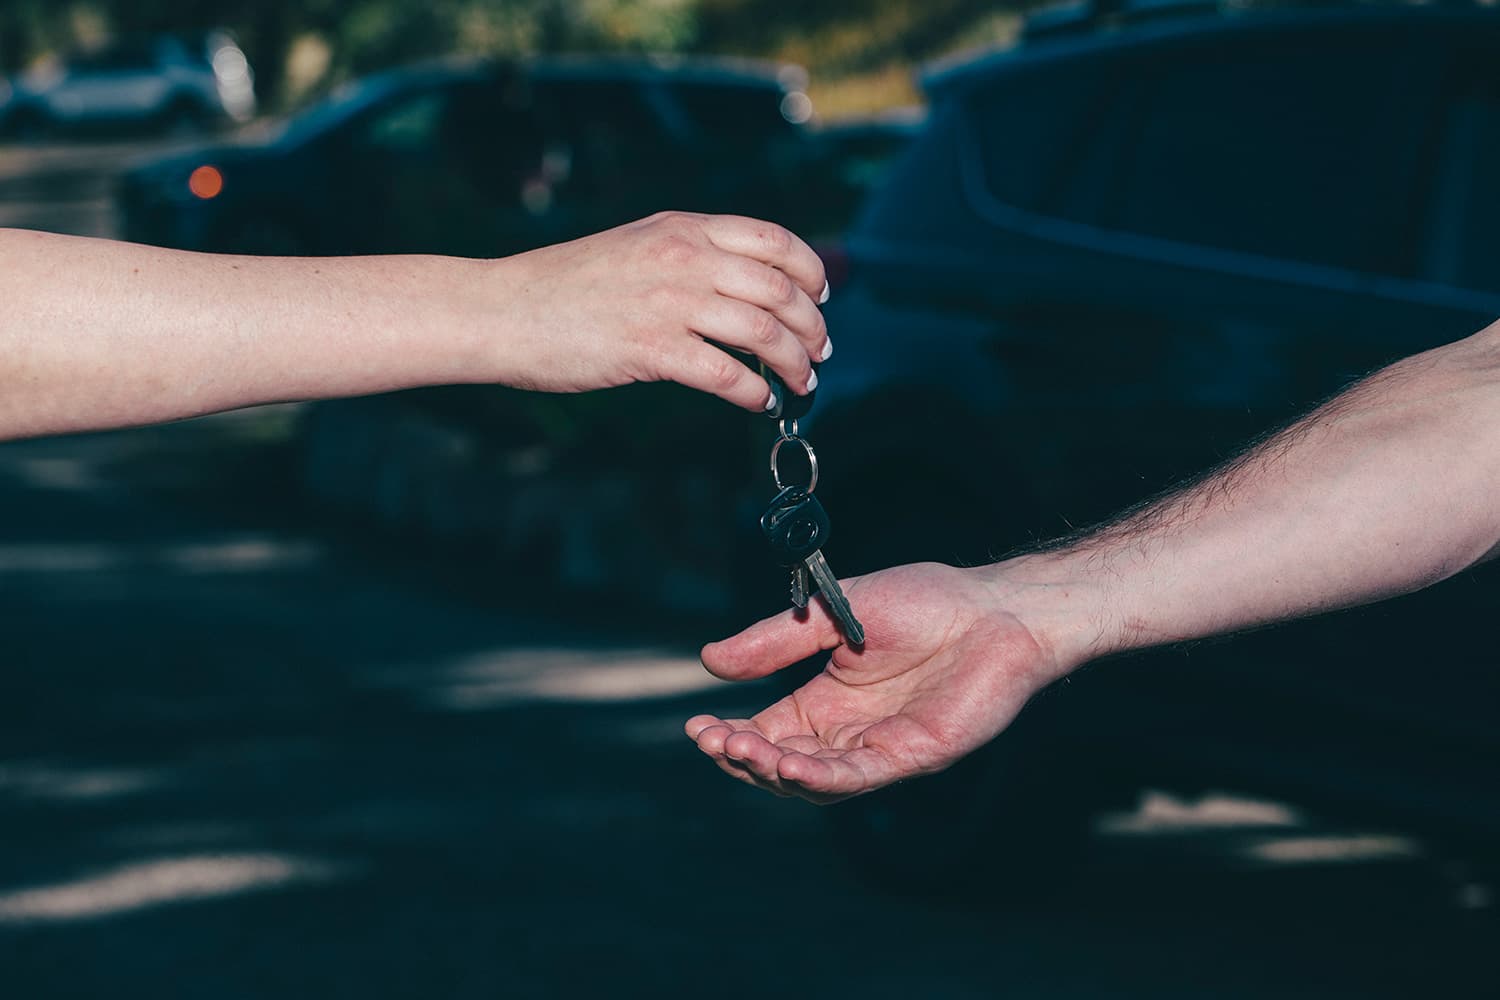 Person's hand dropping keys in another person's hand